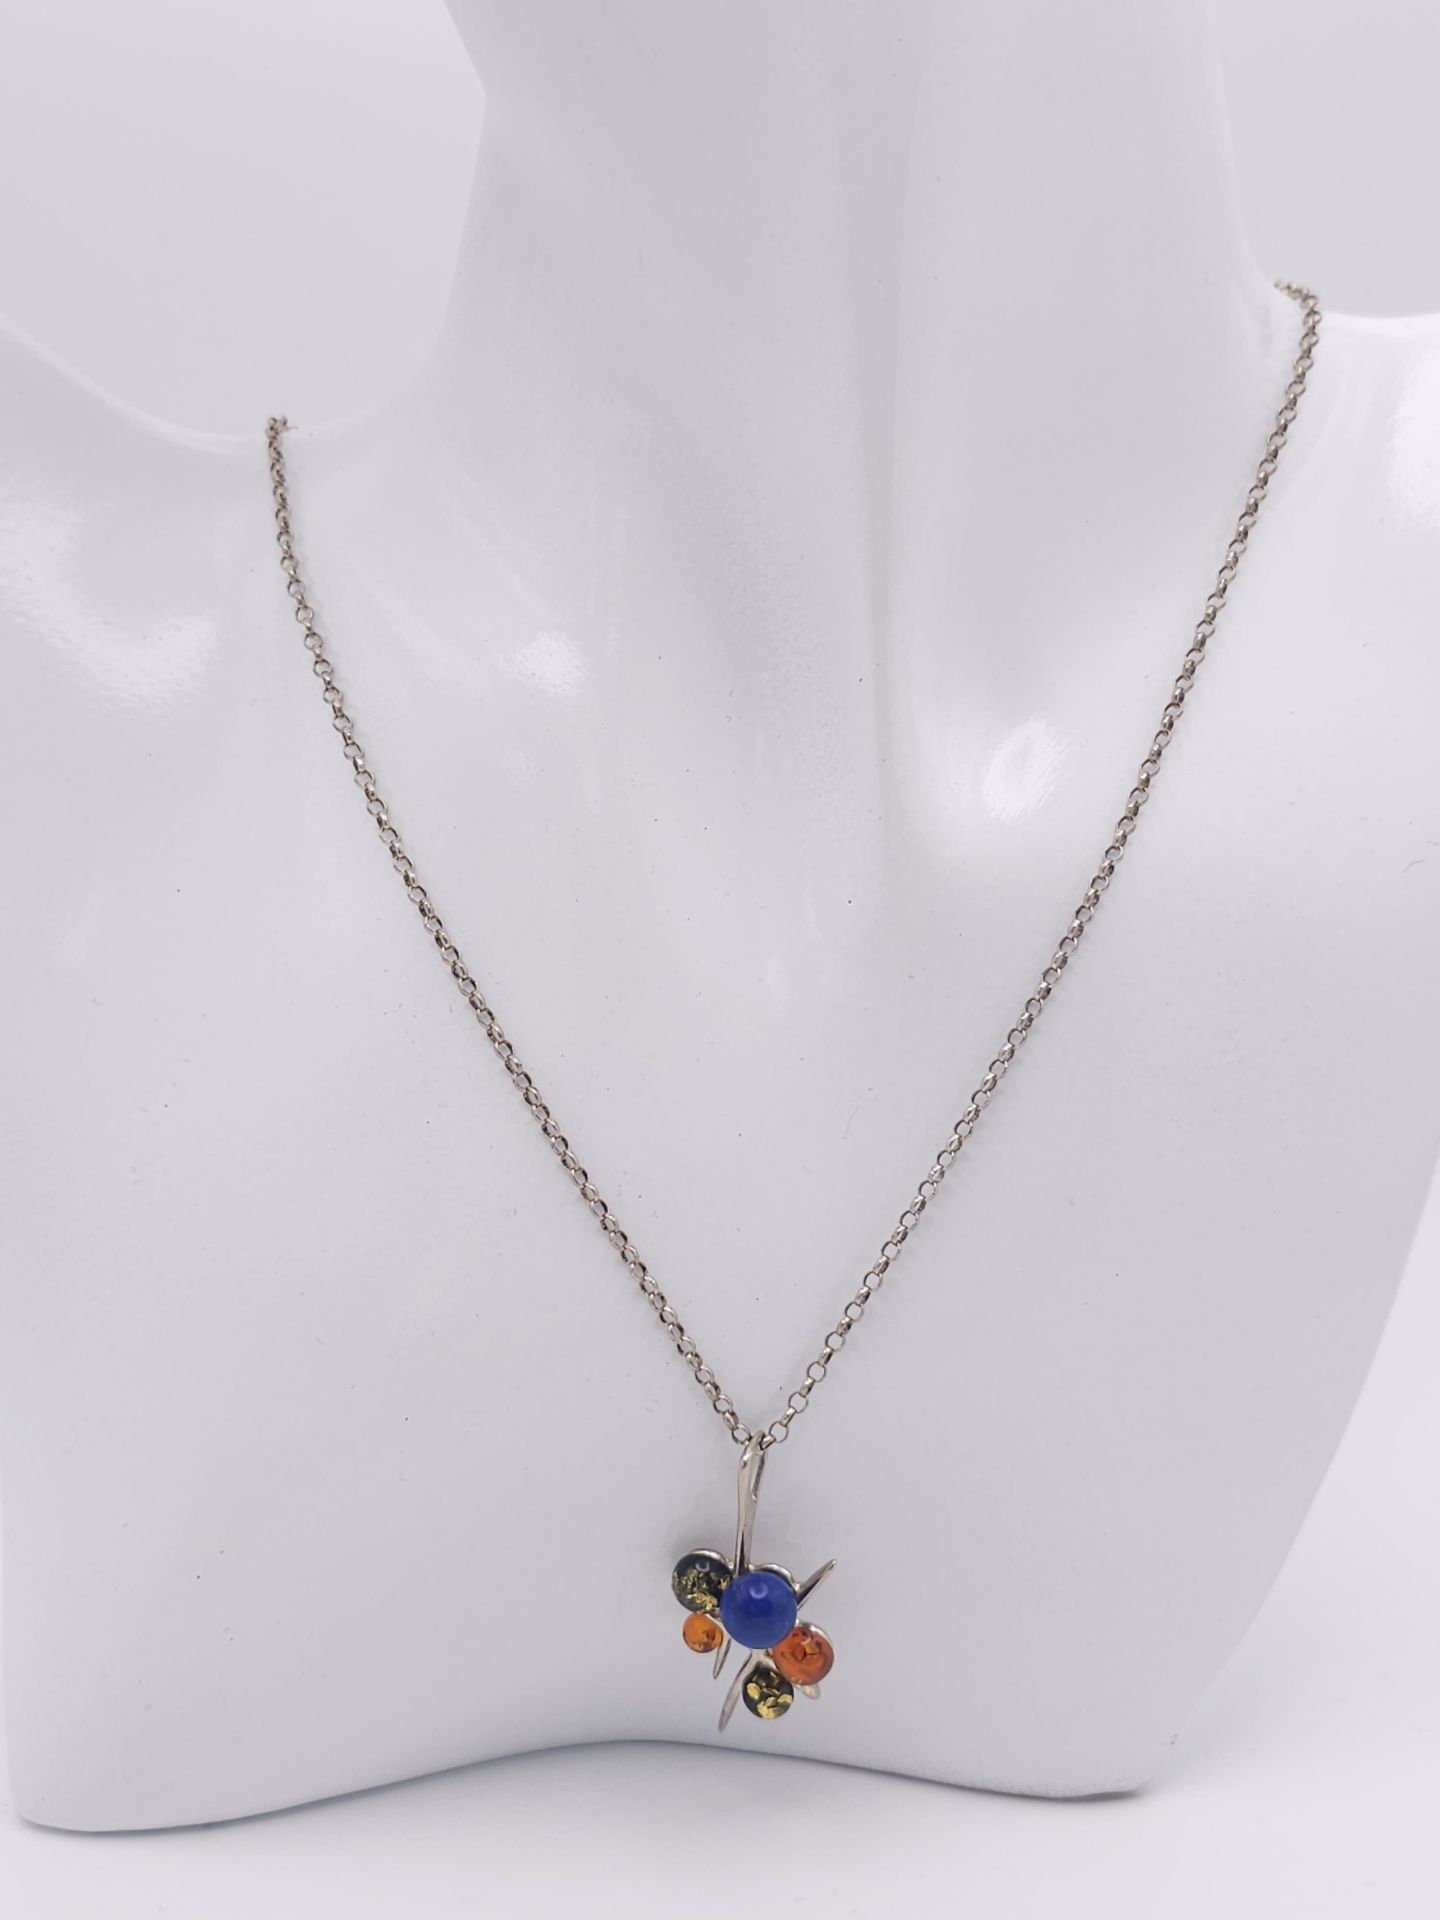 A Vintage and Unique Sterling Silver, Lapis Lazuli, Amber and Green Amber Pendant Necklace. 60cm - Image 2 of 8